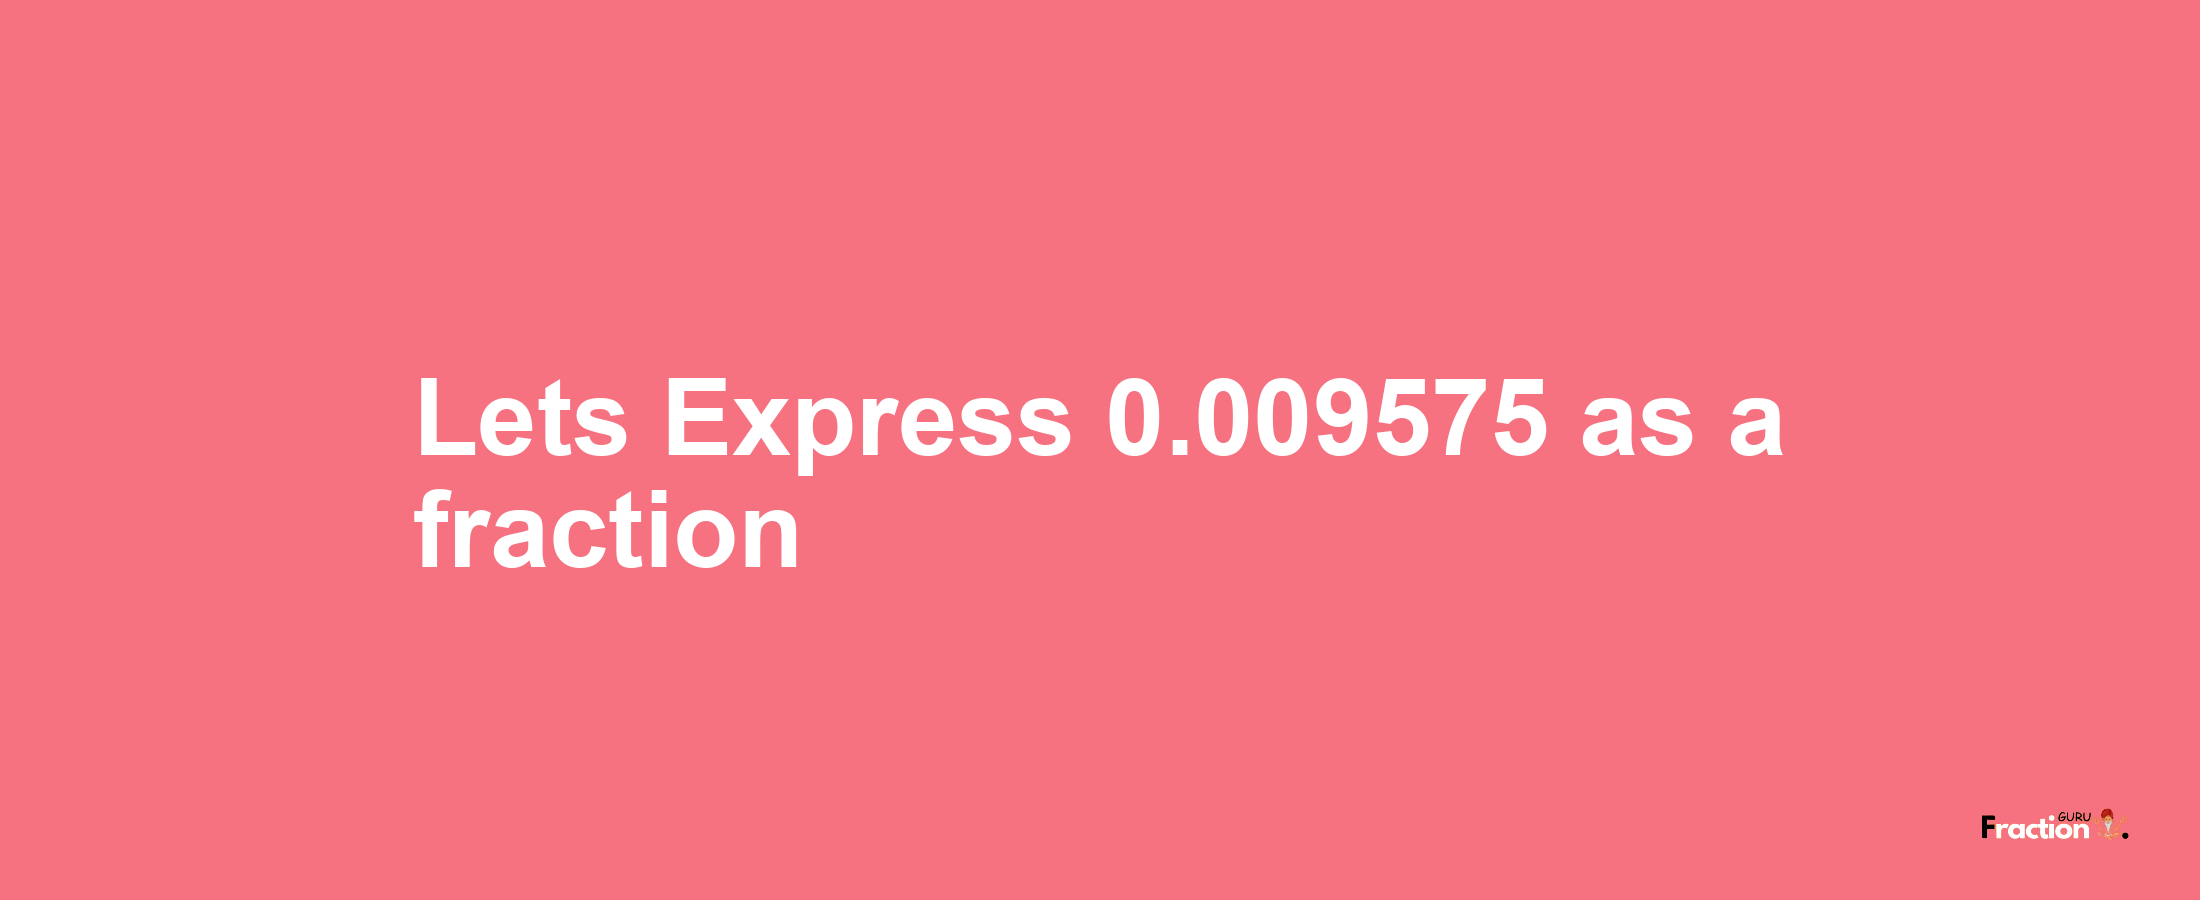 Lets Express 0.009575 as afraction